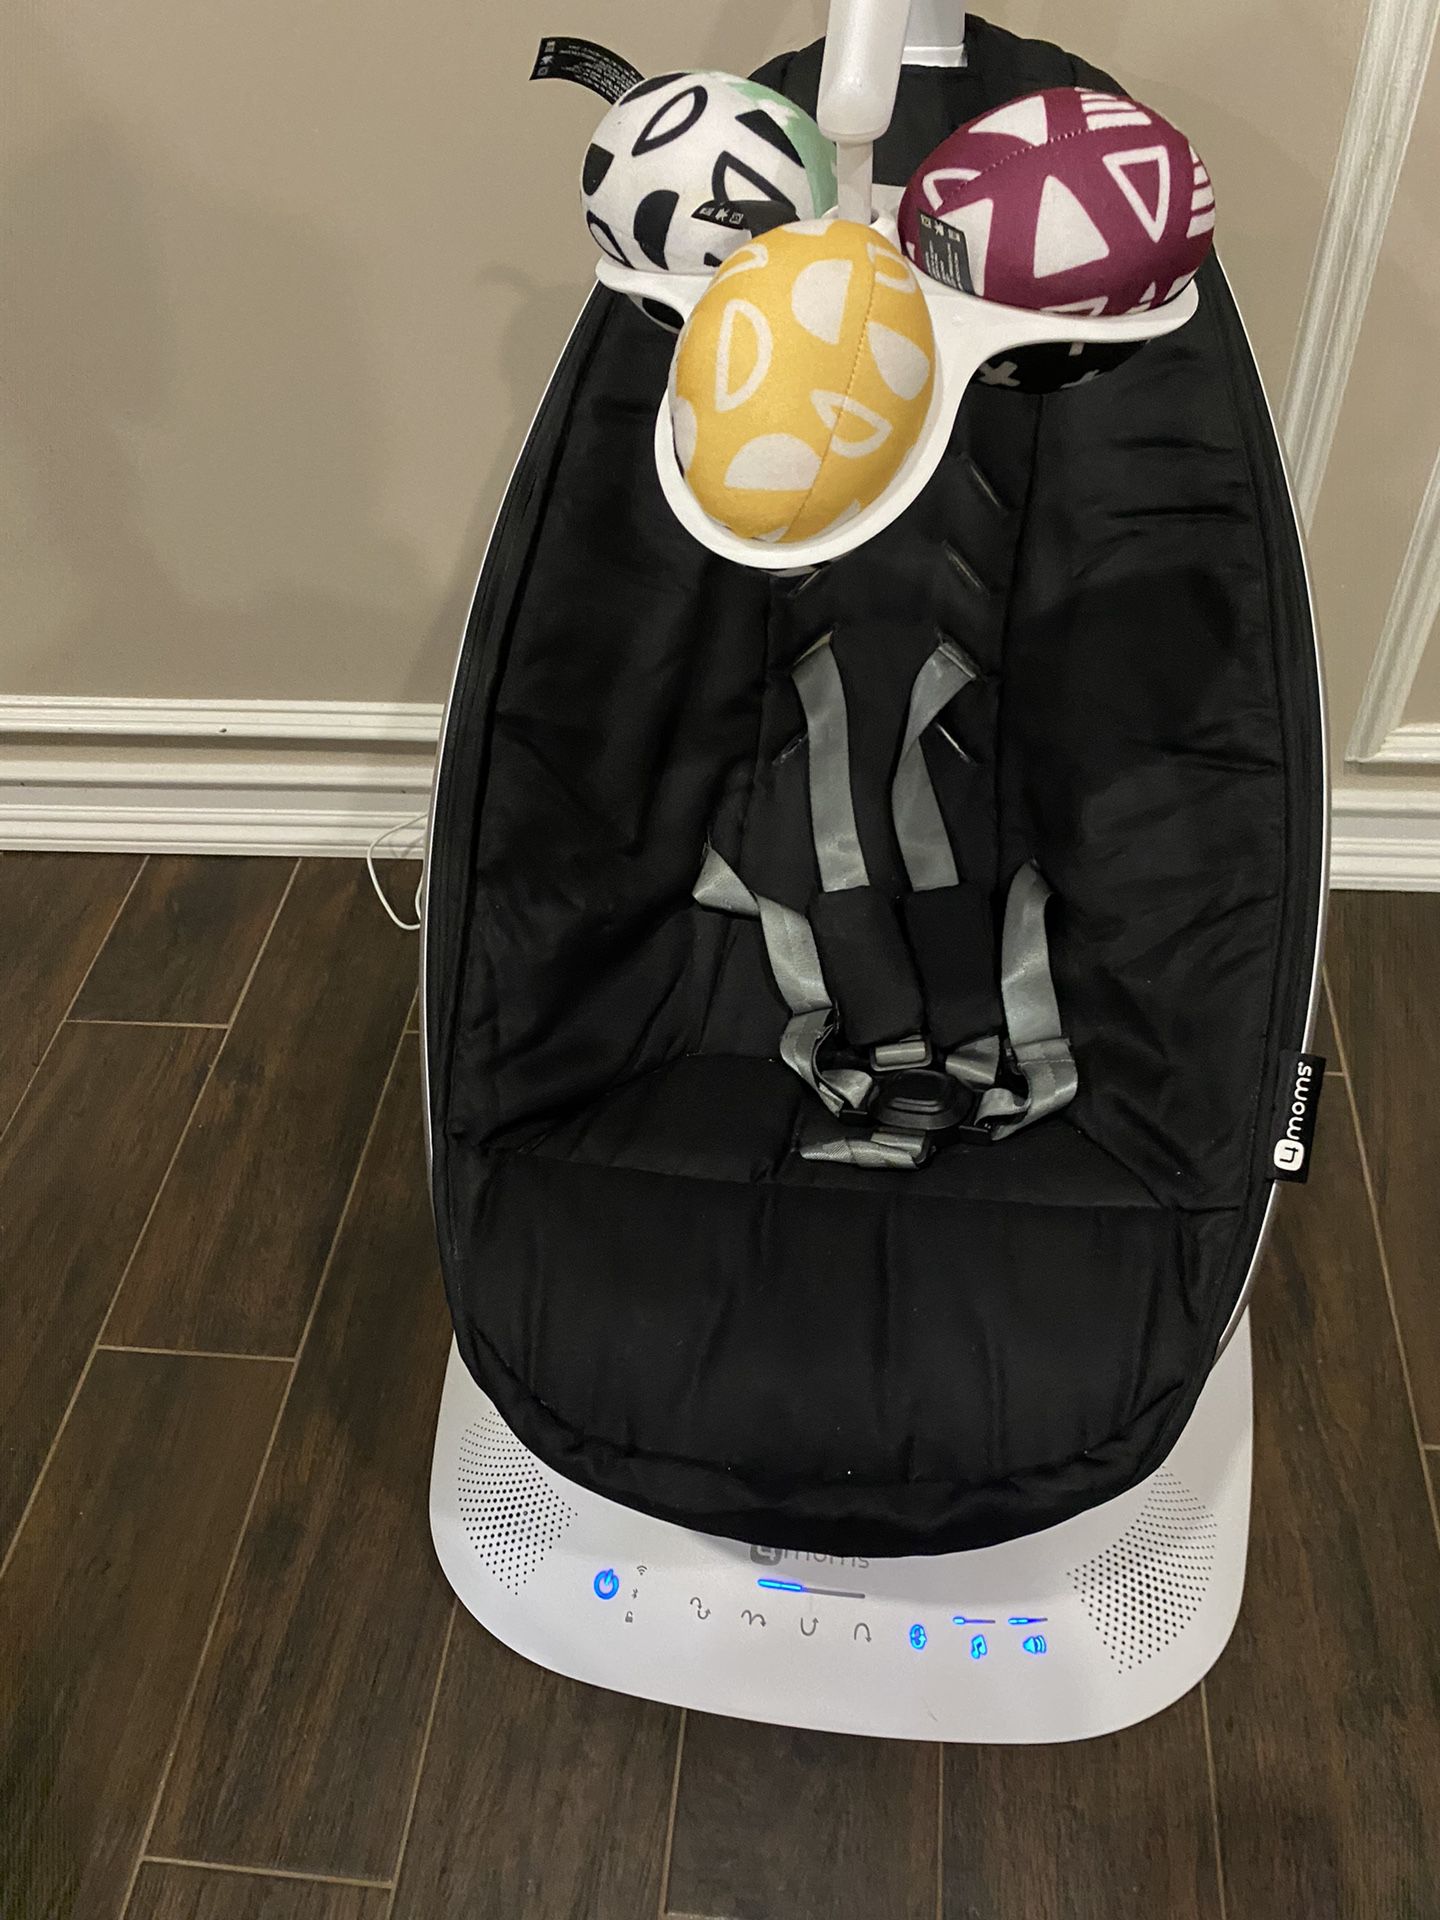 Baby  For Moms Swing - MamaRoo multi - Motion Baby Swing Smart Connectivity